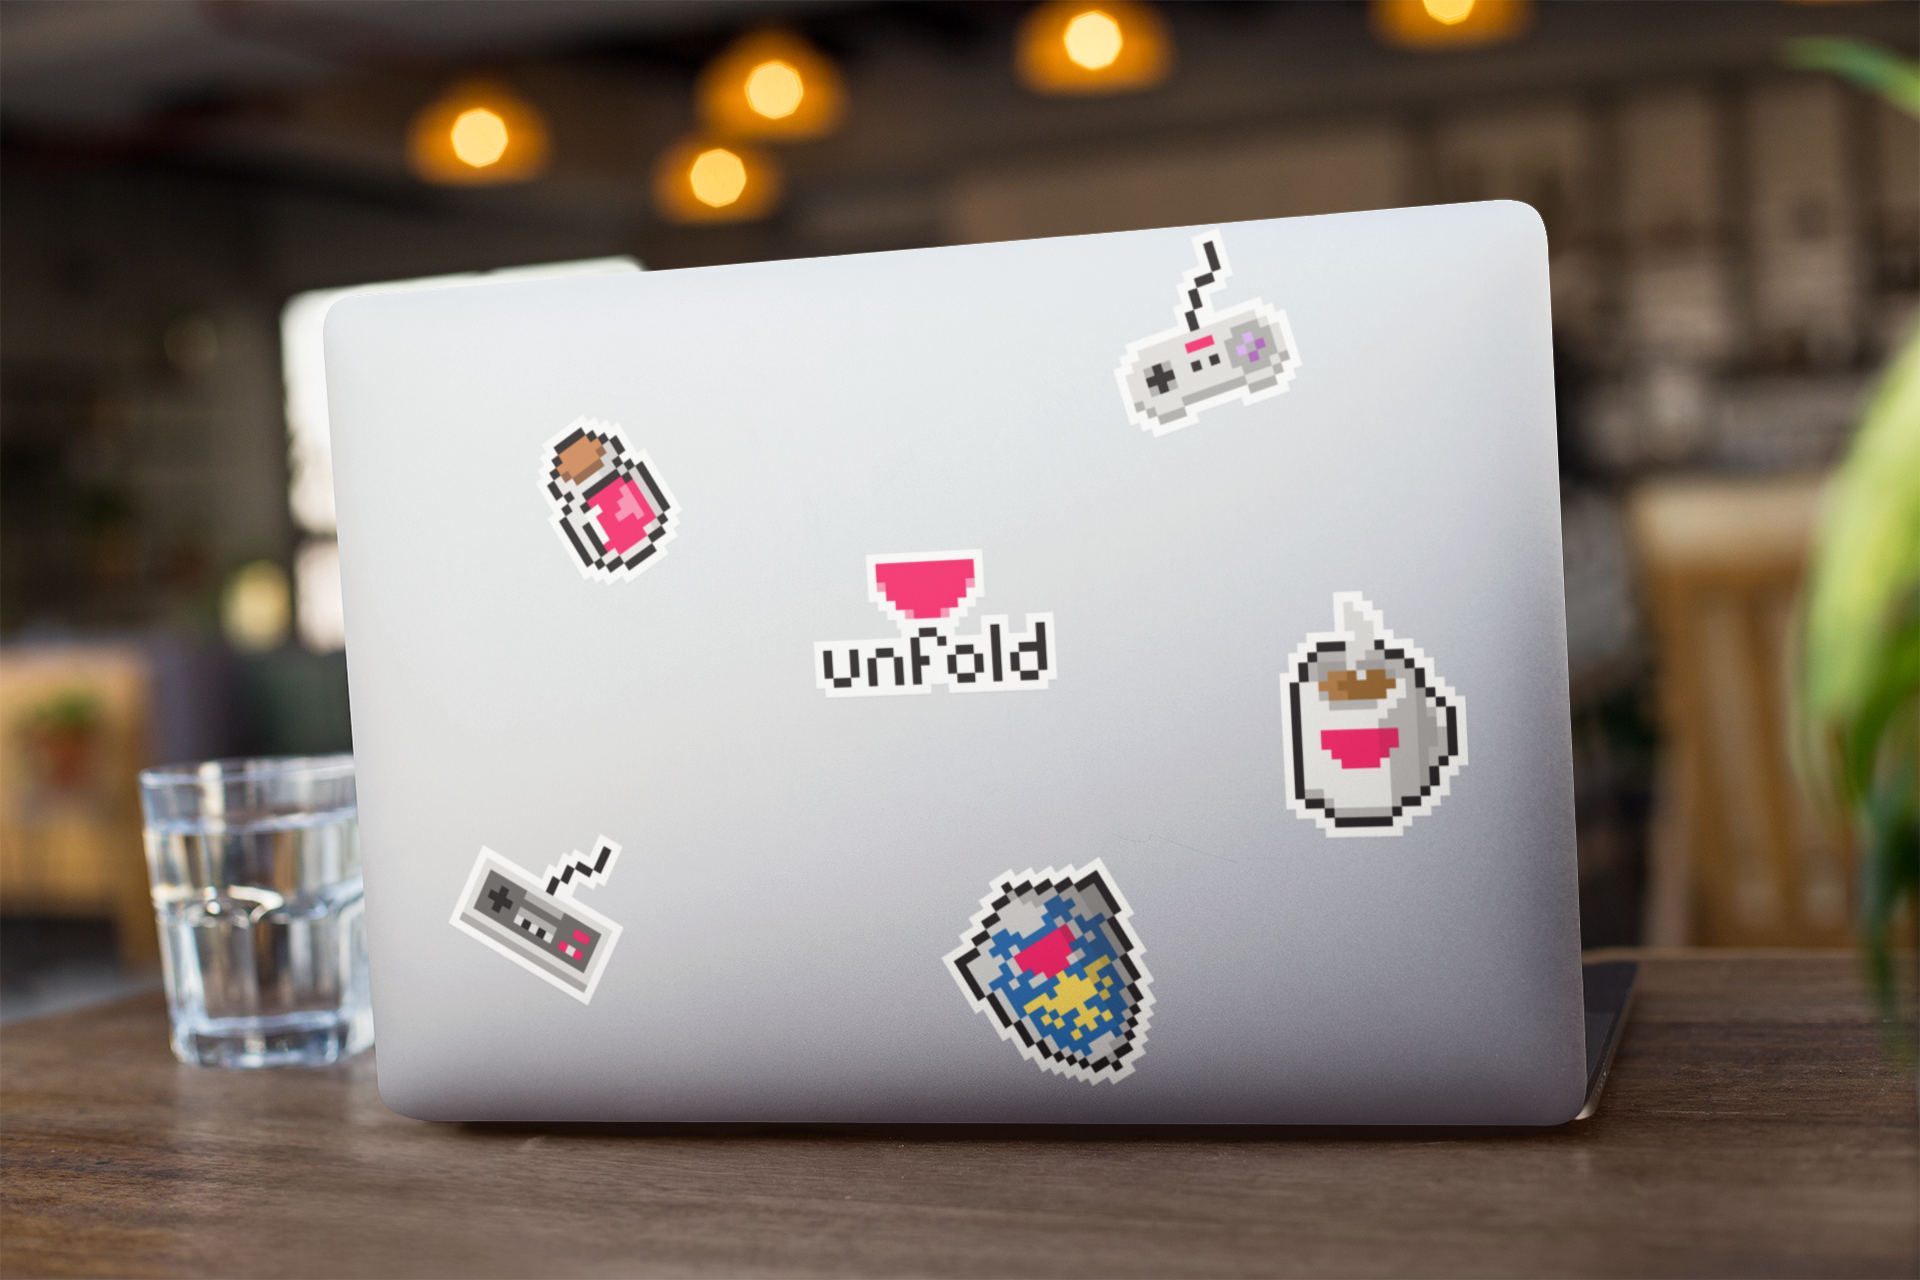 Download Dribbble - laptop-sticker-mockup-of-a-computer-on-wooden ...